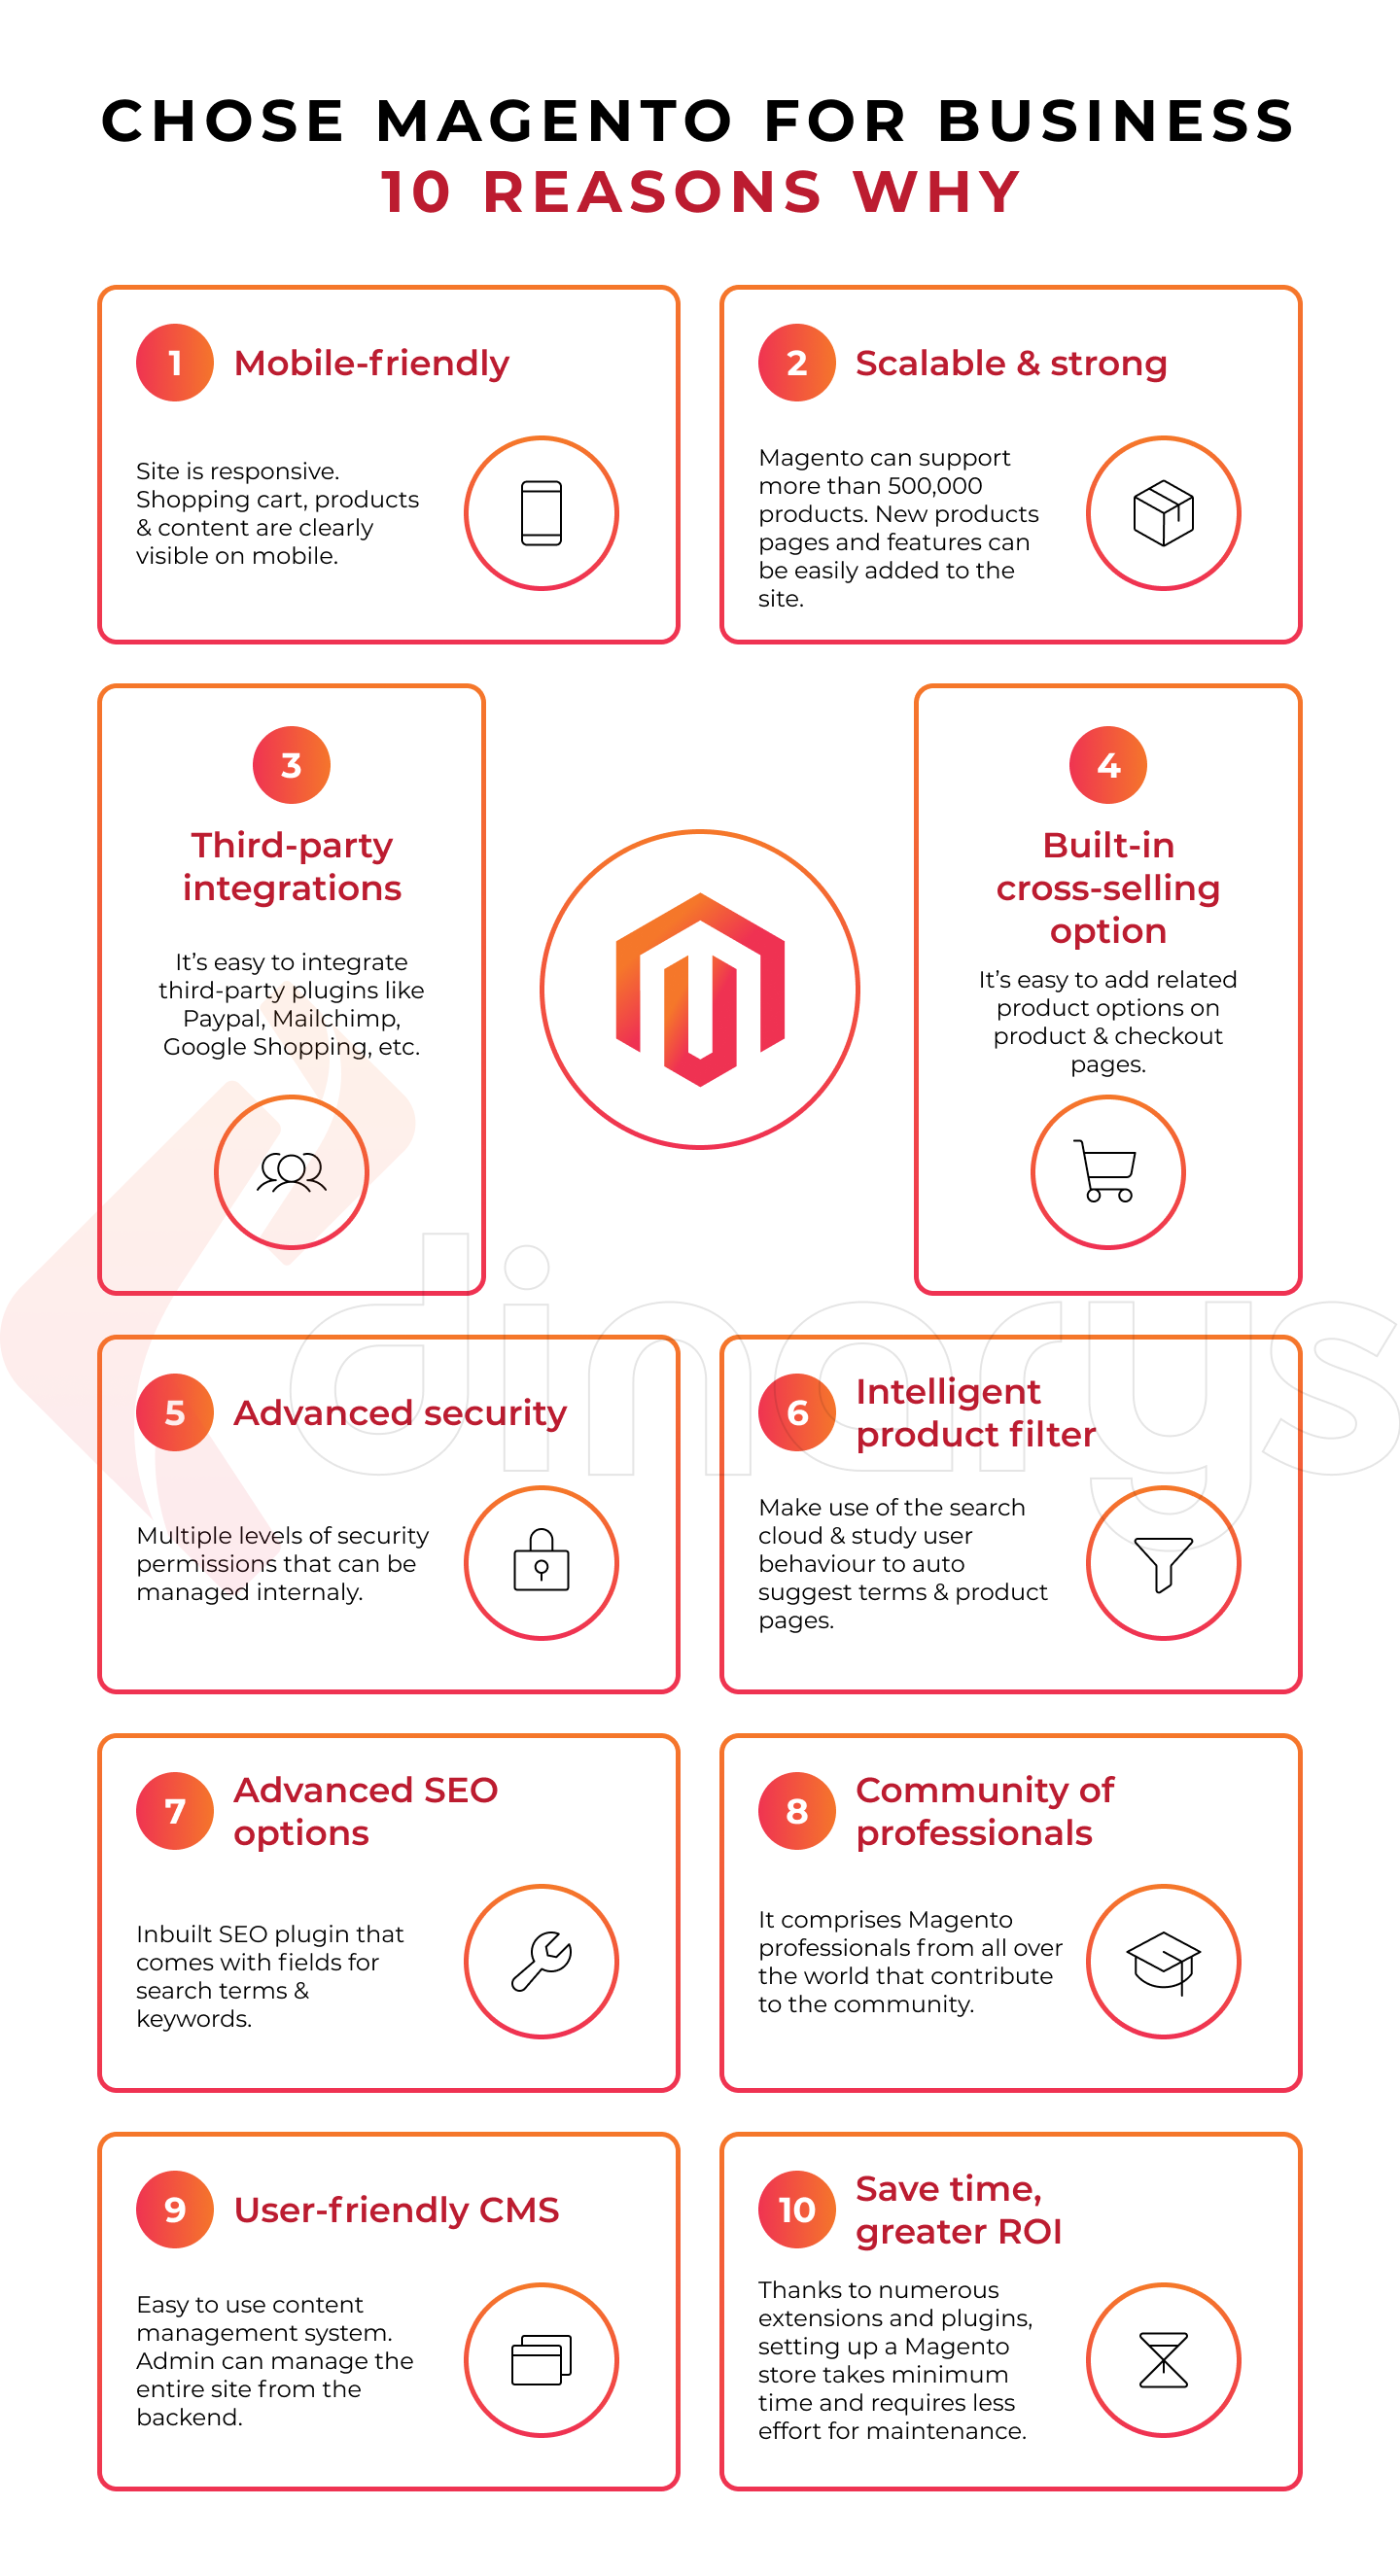 10 Reasons Why Choose Magento for Your Business